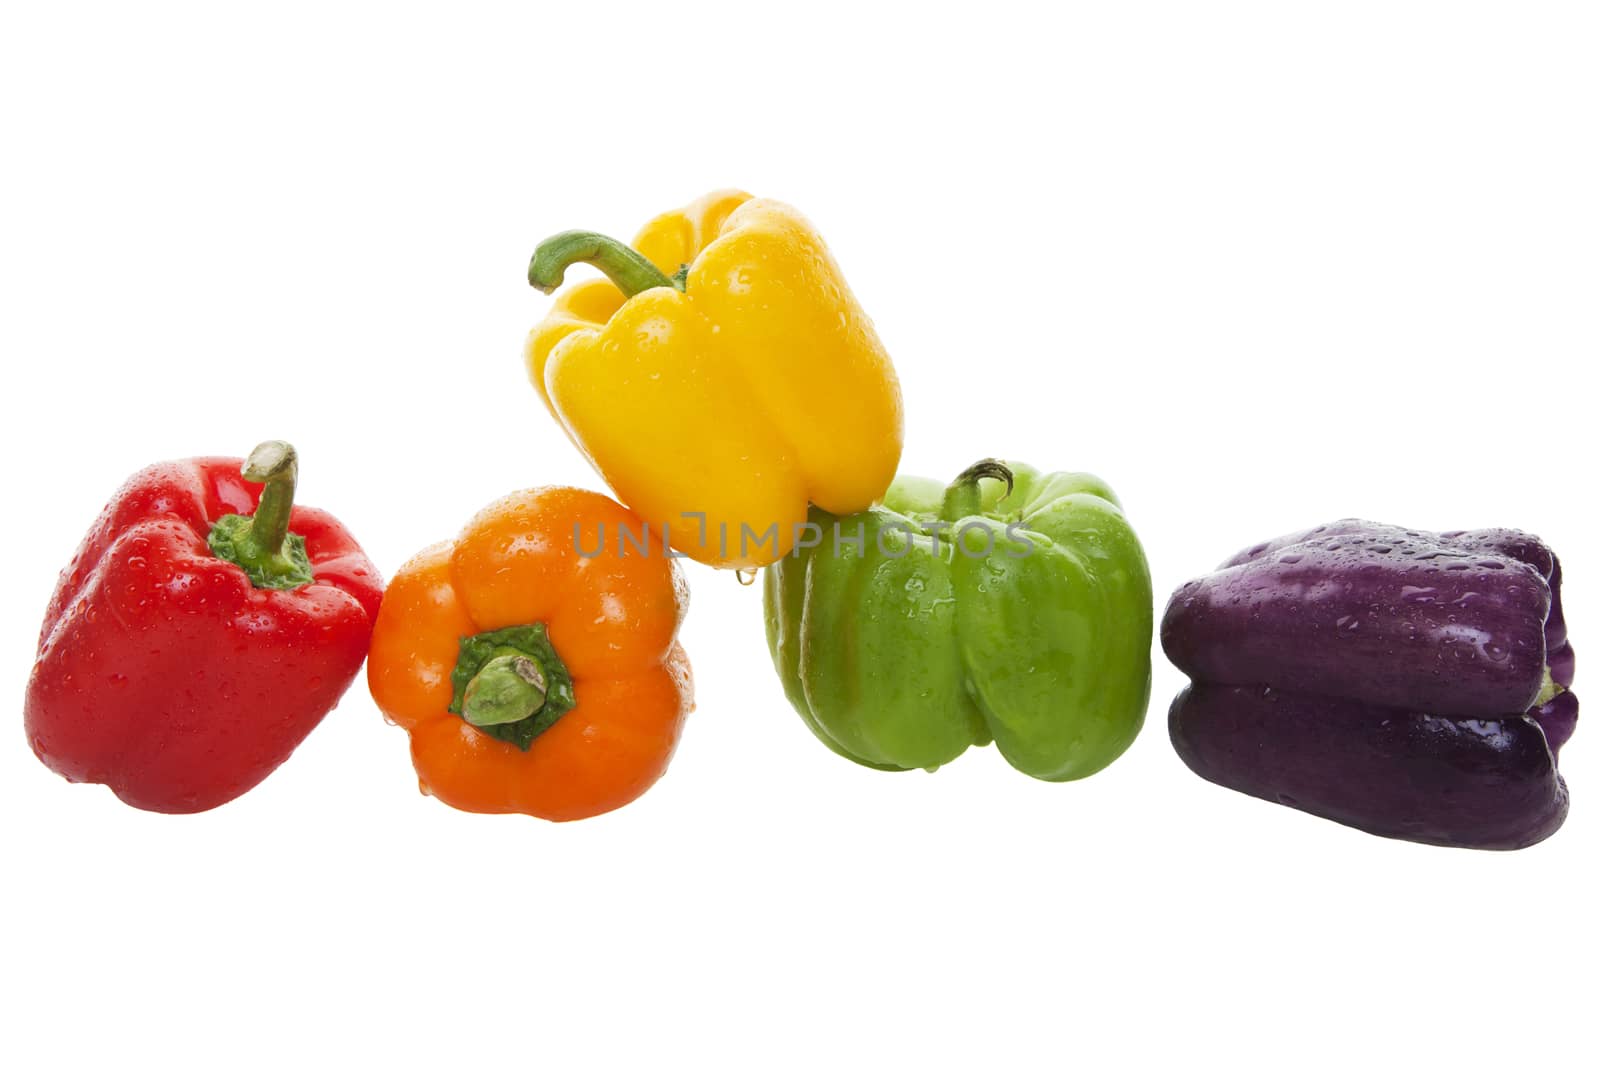 The newest bell pepper hybrid, named Bluejay, adds purple to the lineup of colorful bell peppers that can be used to add color and drama to a salad or dish.  Shot on white background.  